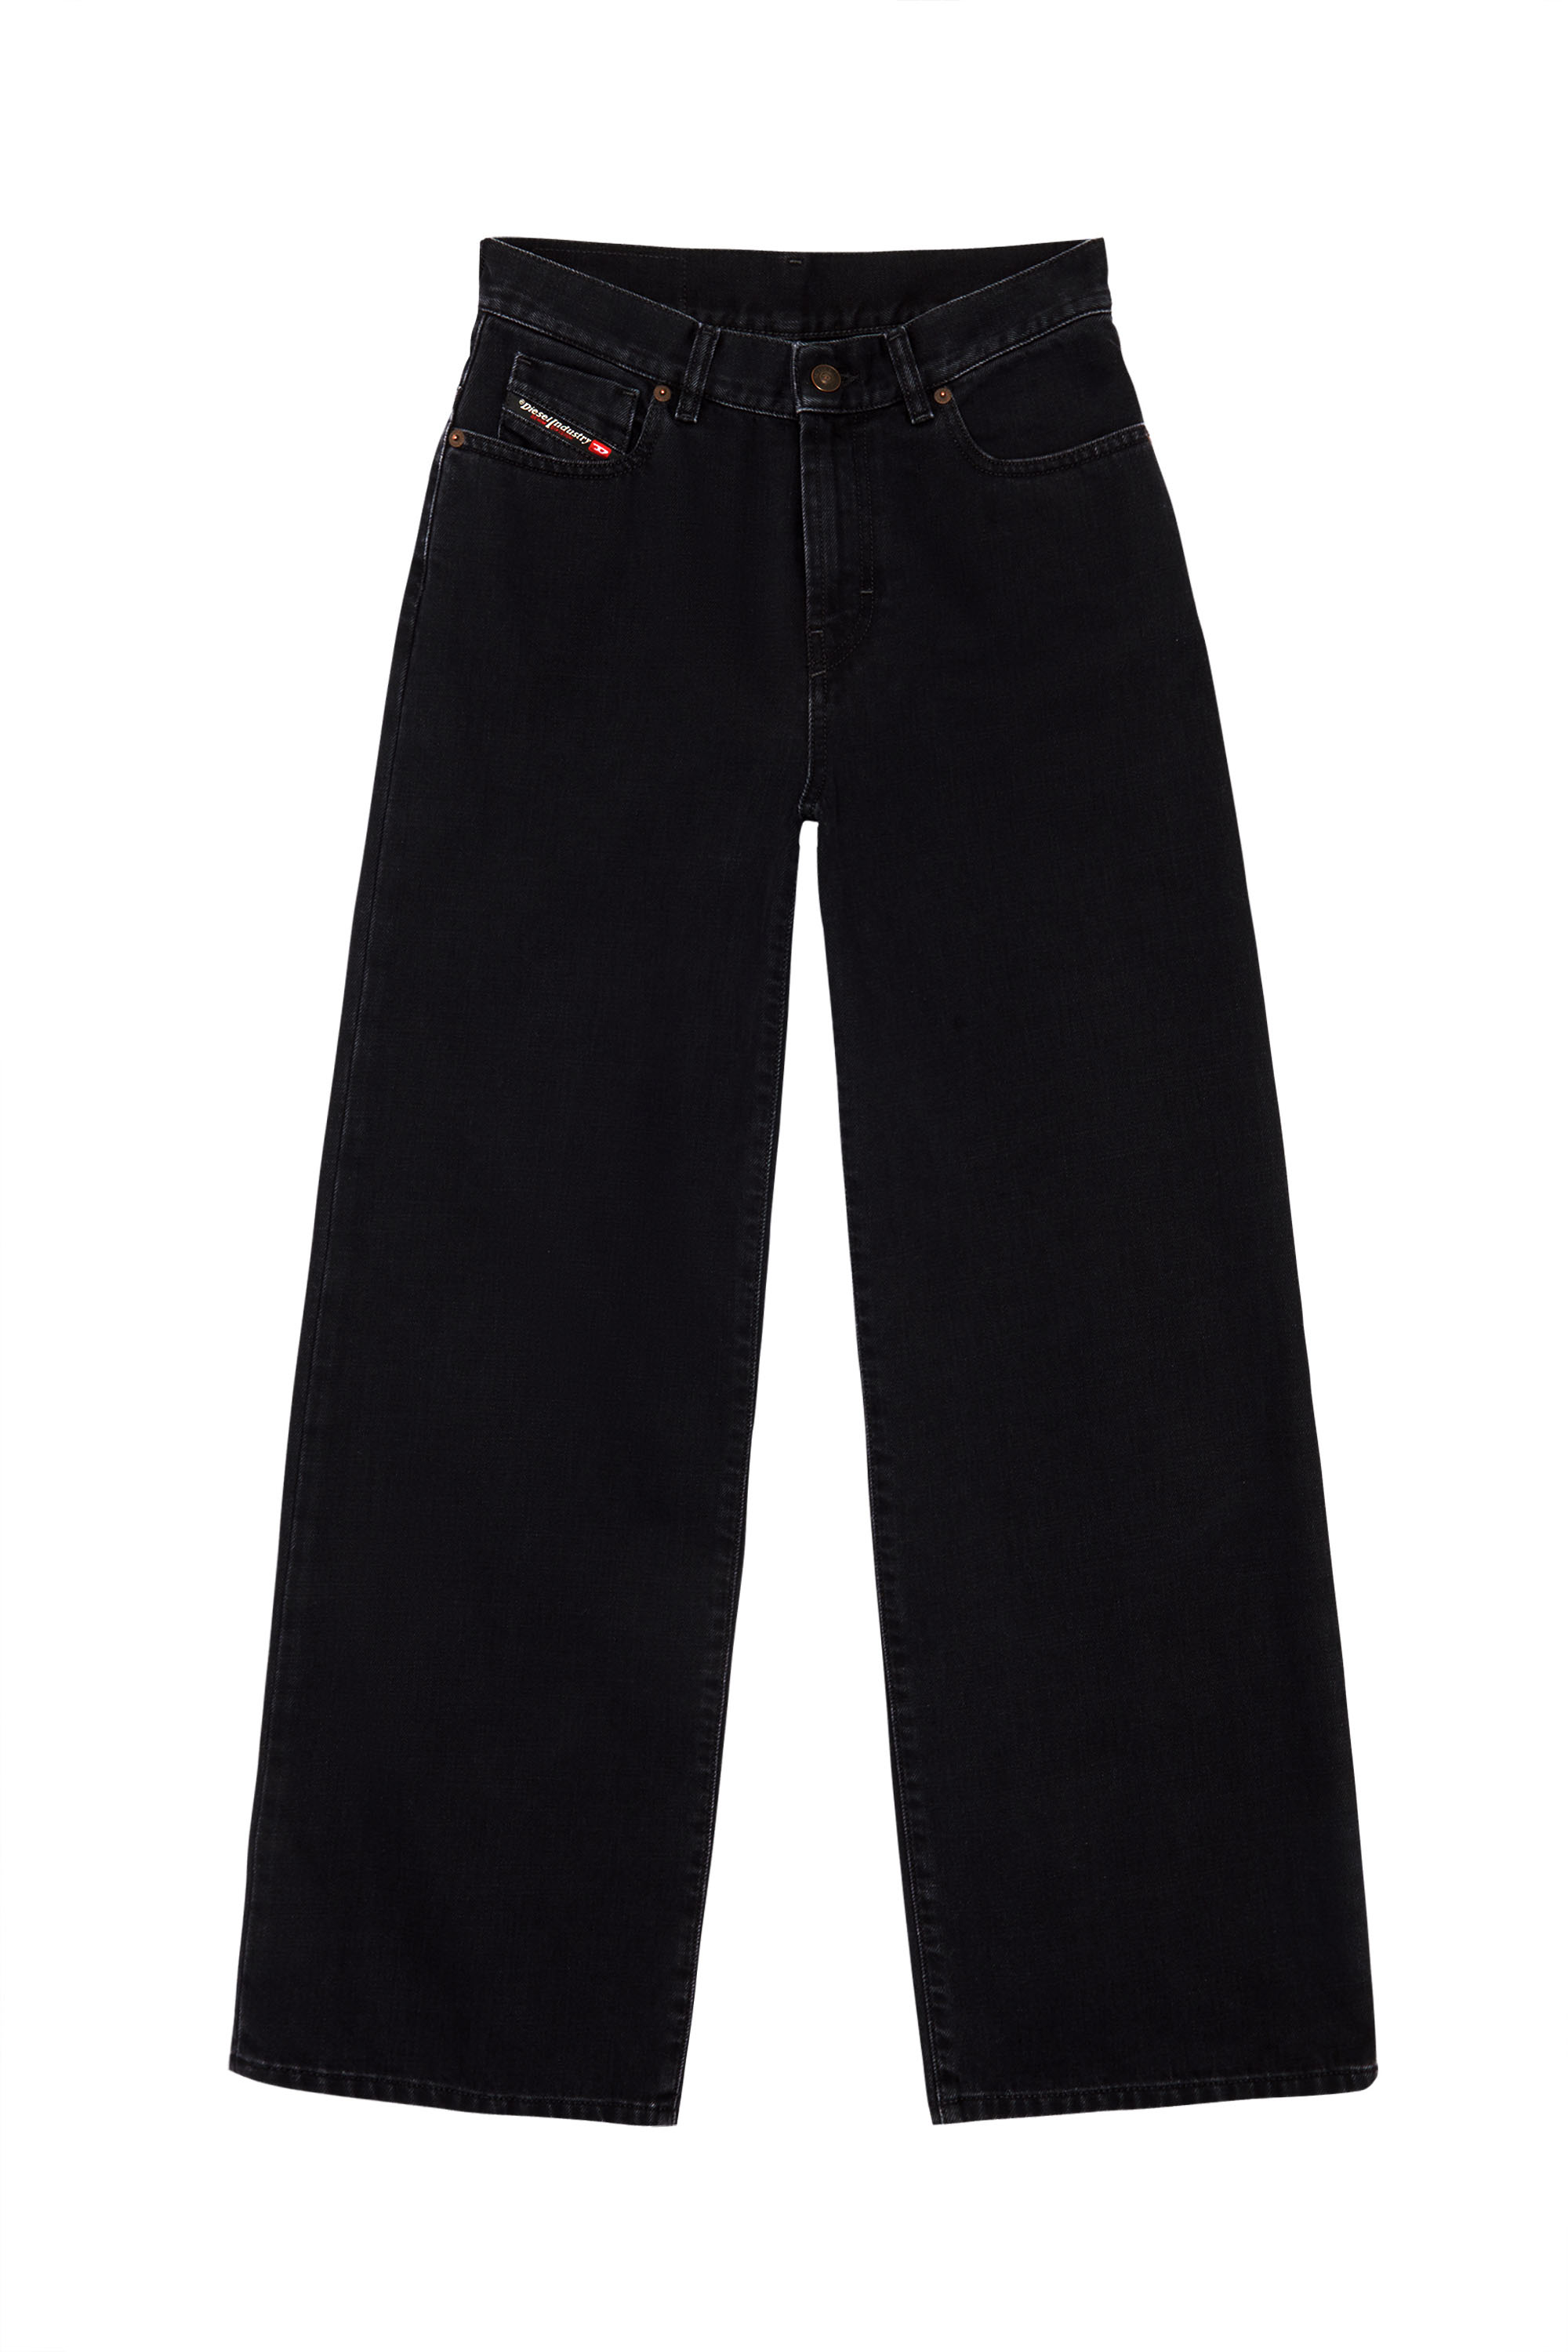 2000 Z09RL Bootcut and Flare Jeans, Nero/Grigio scuro - Jeans